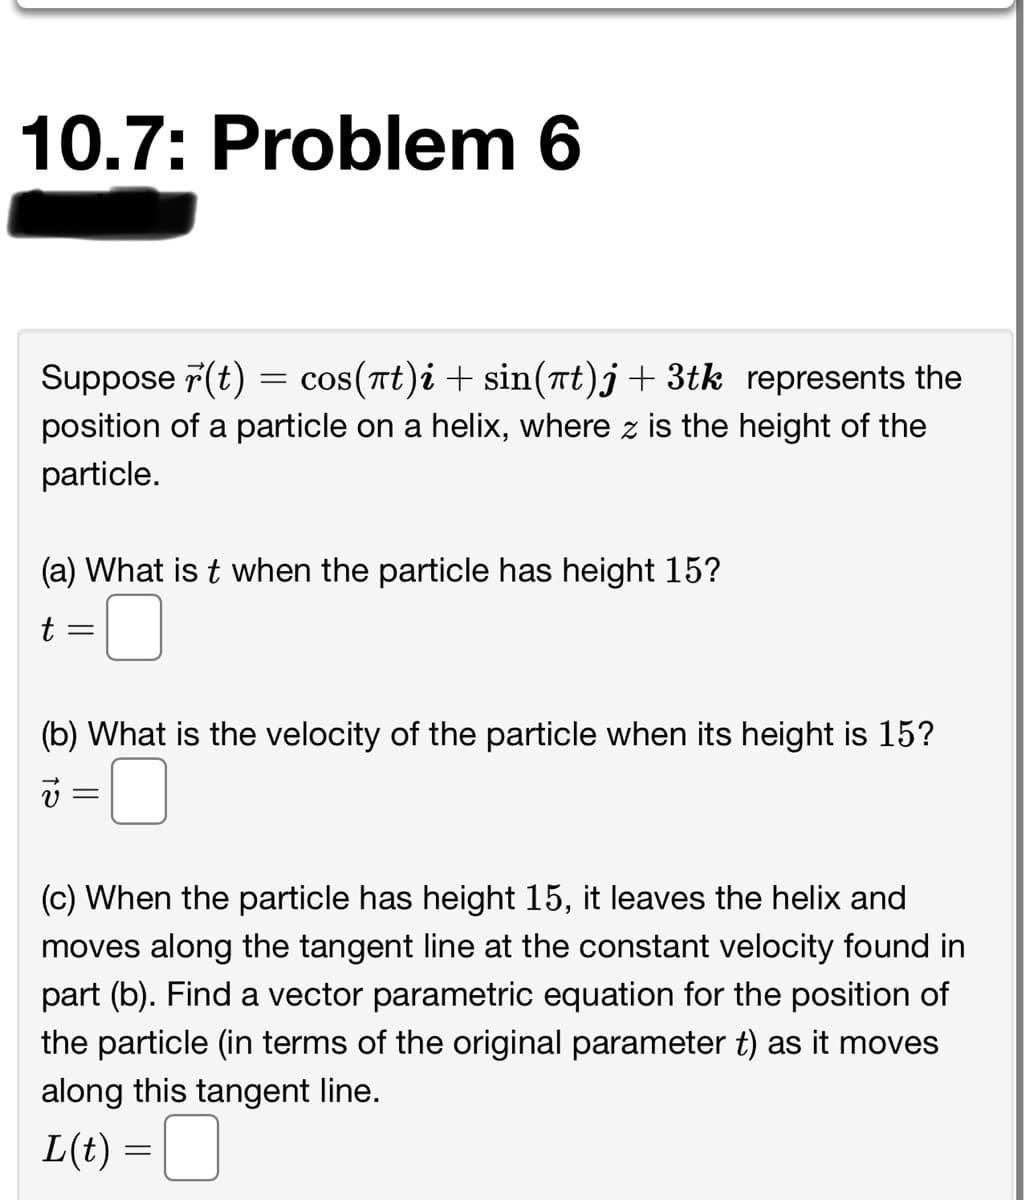 10.7: Problem 6
Suppose 7(t) = cos(rt)i + sin(nt)j+ 3tk represents the
position of a particle on a helix, where z is the height of the
particle.
(a) What is t when the particle has height 15?
(b) What is the velocity of the particle when its height is 15?
(c) When the particle has height 15, it leaves the helix and
moves along the tangent line at the constant velocity found in
part (b). Find a vector parametric equation for the position of
the particle (in terms of the original parameter t) as it moves
along this tangent line.
L(t) =|
